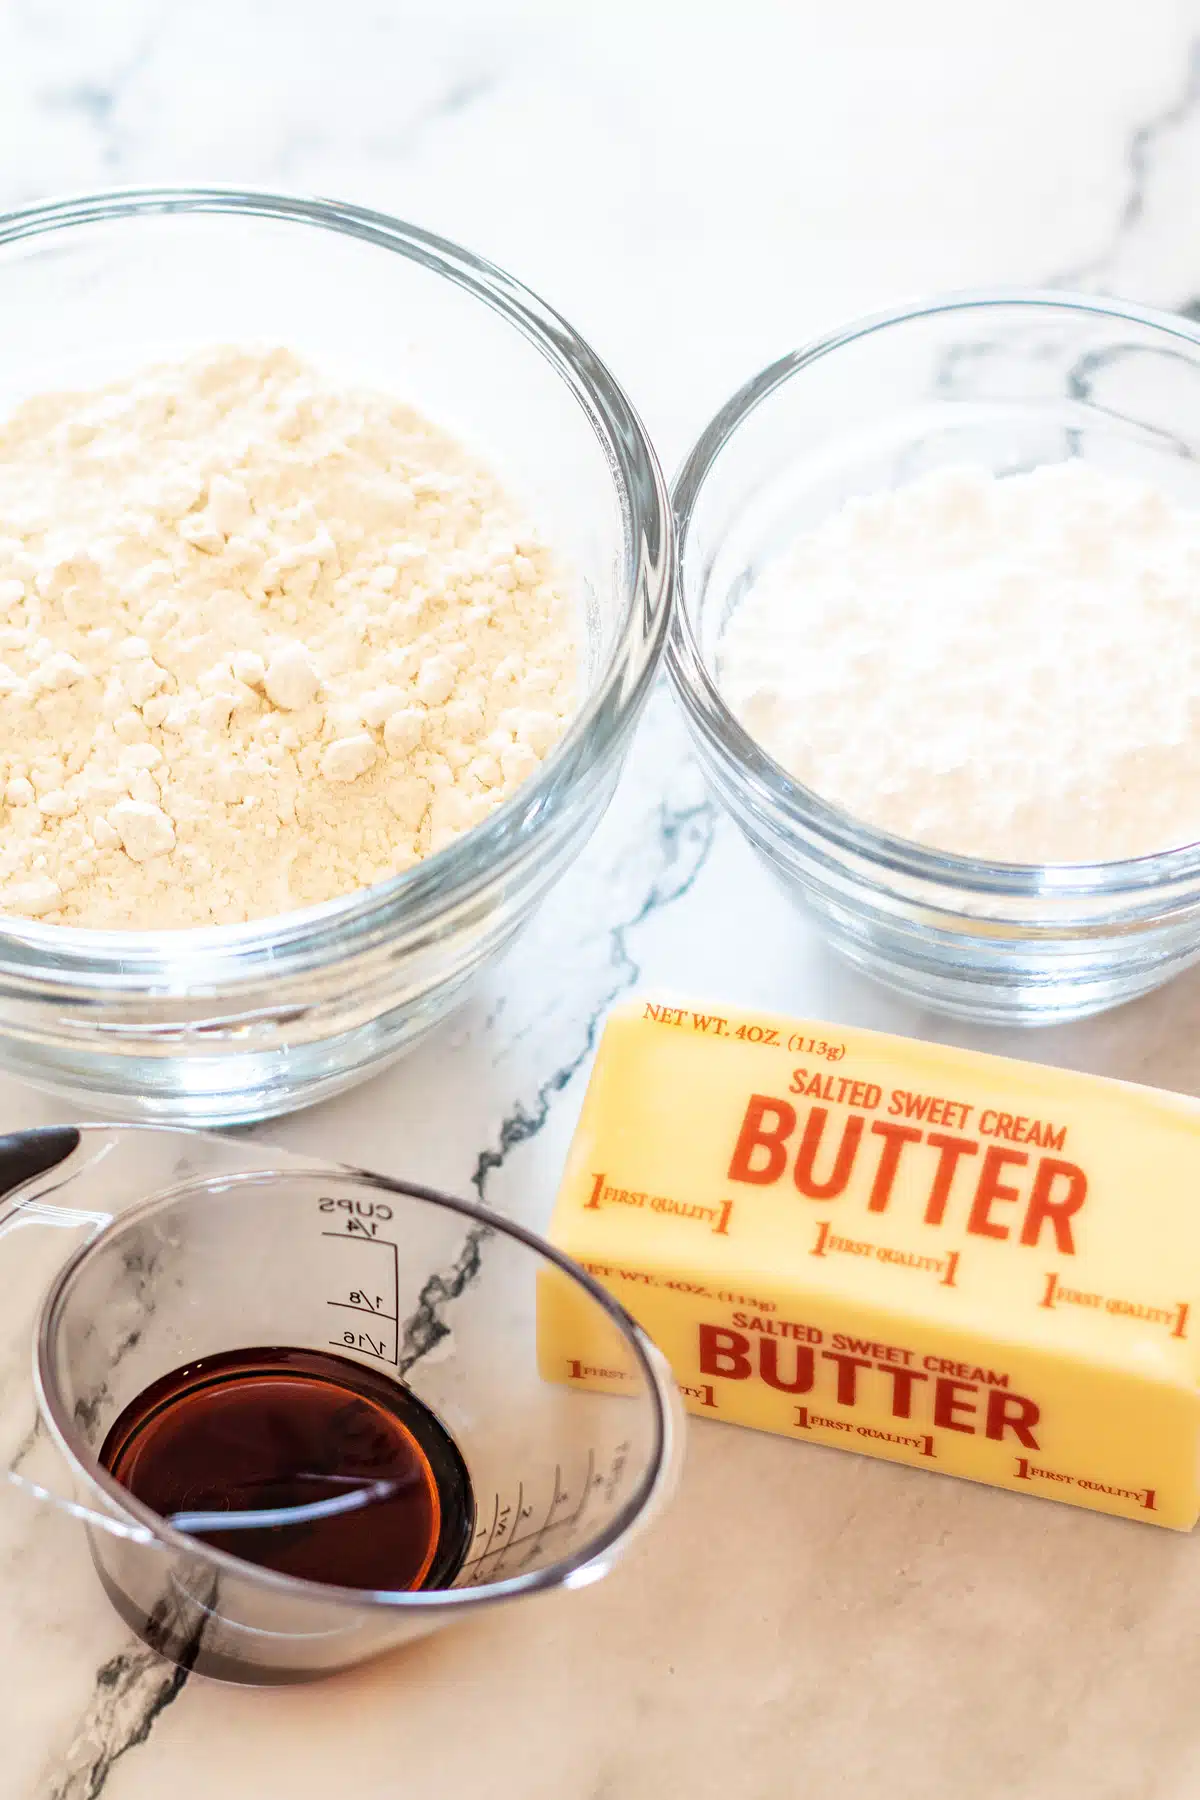 Tall image showing Danish butter cookie ingredients.